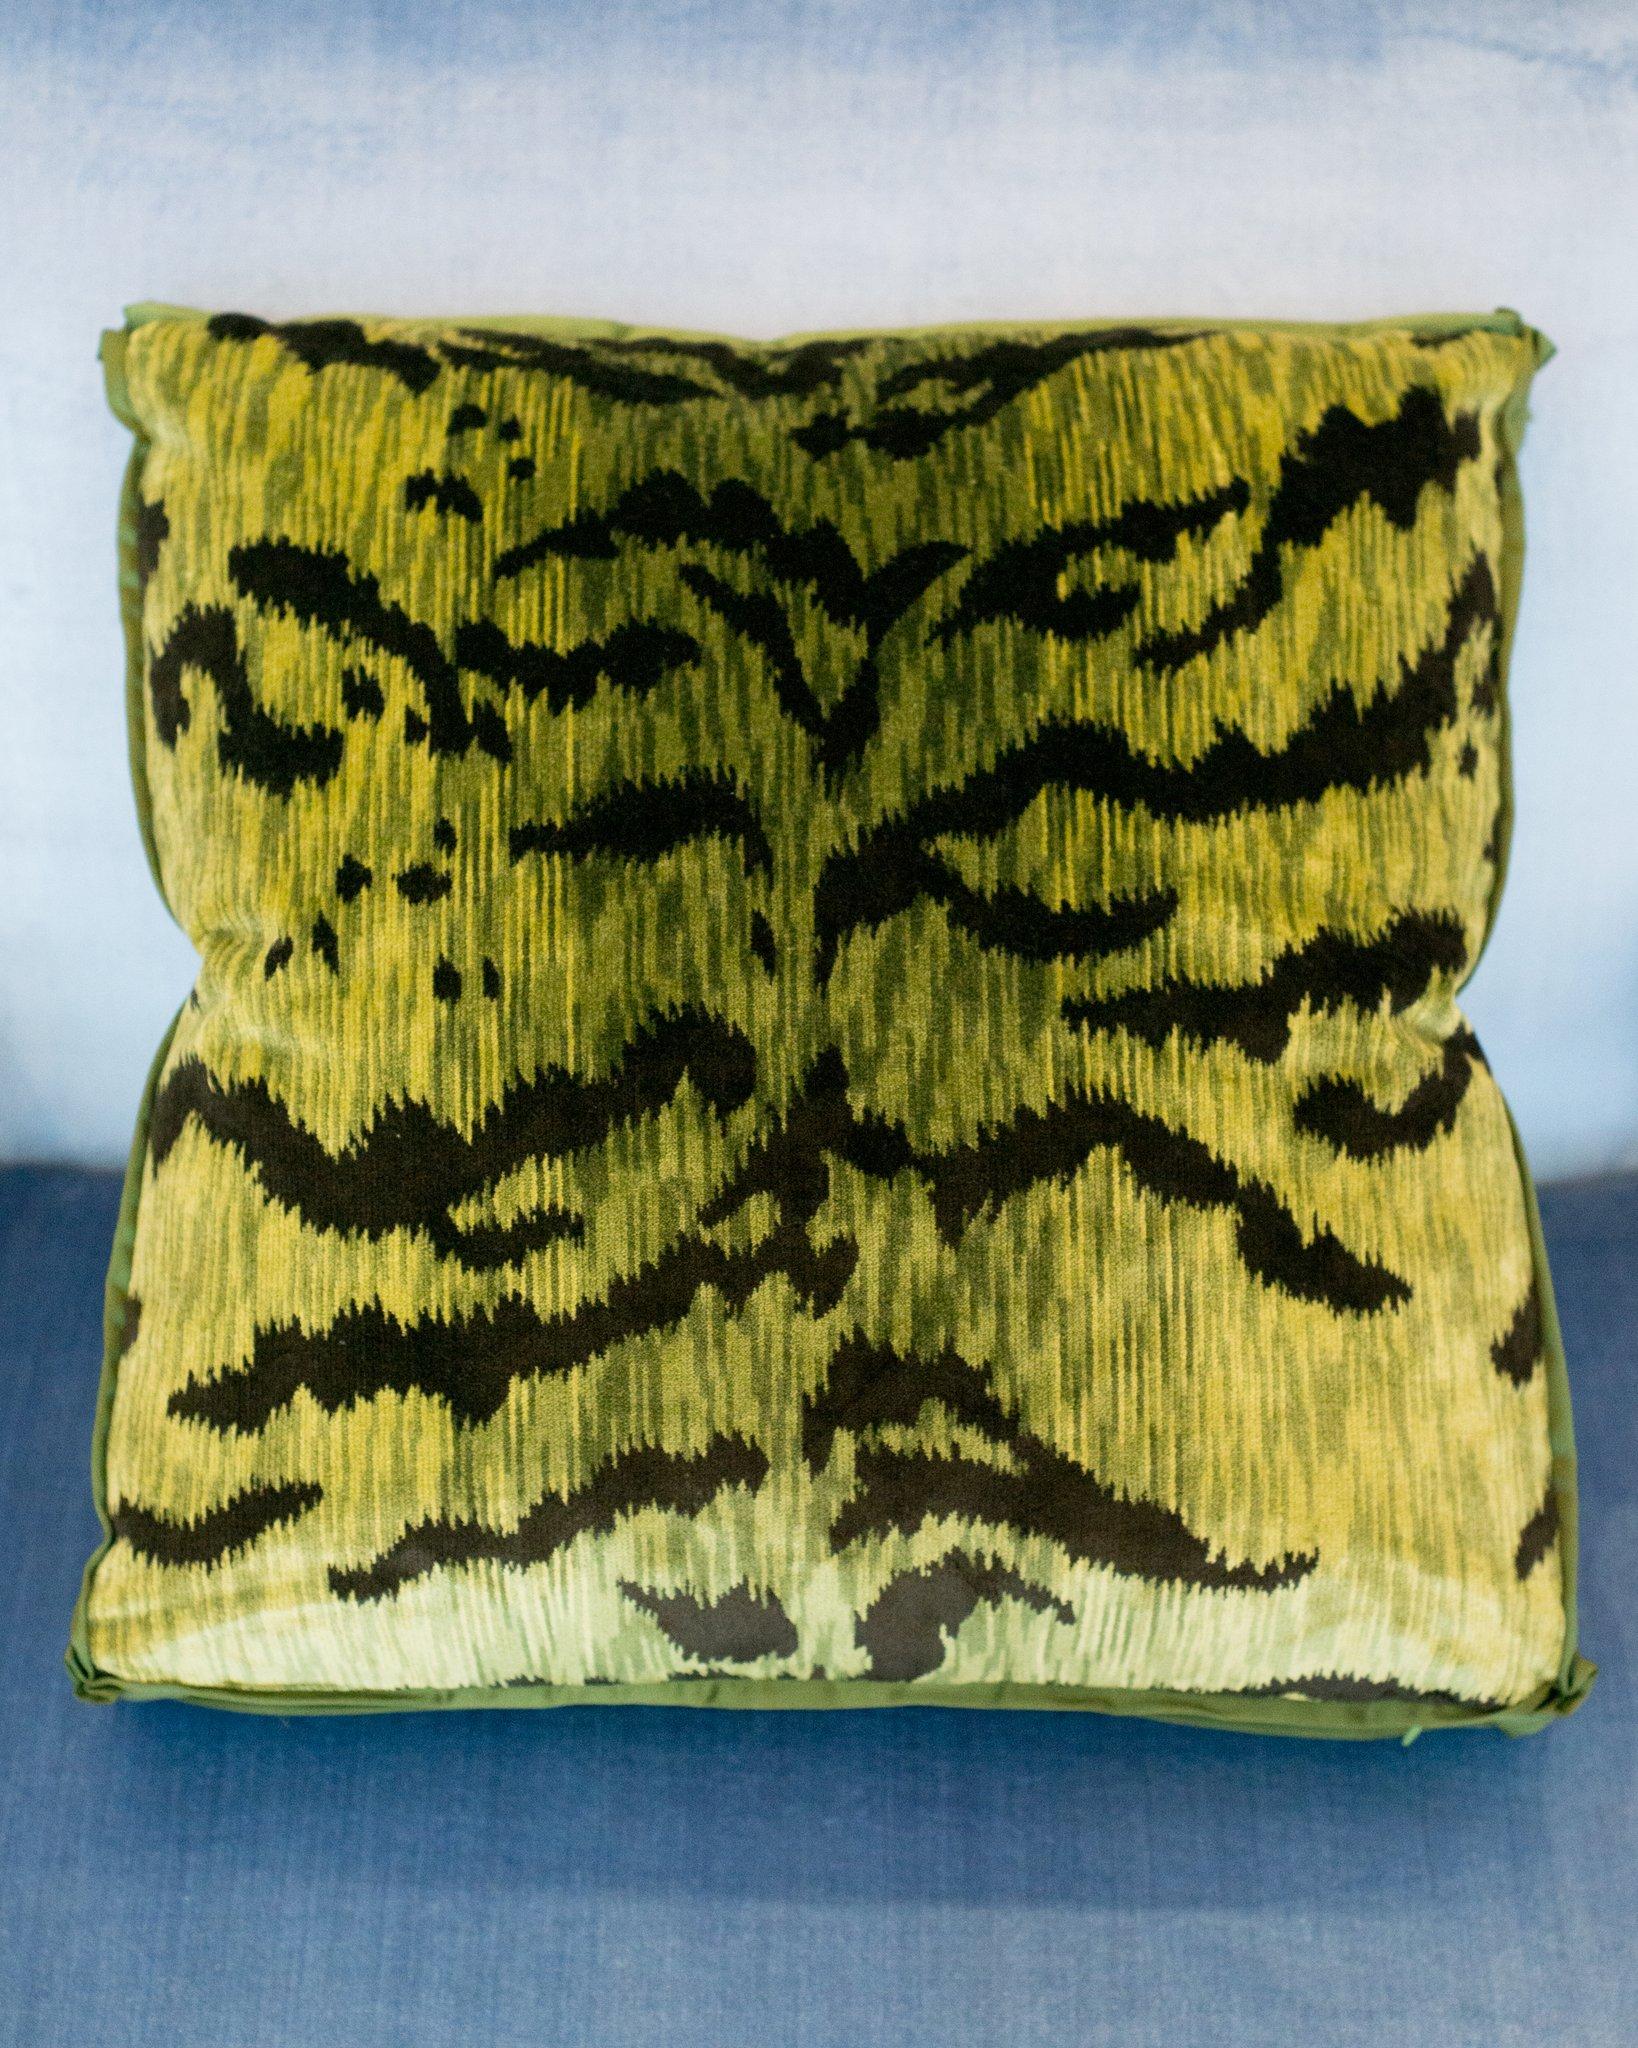 A pair of luxurious Studio Maison Nurita pillows in our signature box design with Bevilacqua chartreuse green and black tiger print velvet with a satin border and pleated corners. Established by Luigi Bevilacqua, and operating out of Venice since